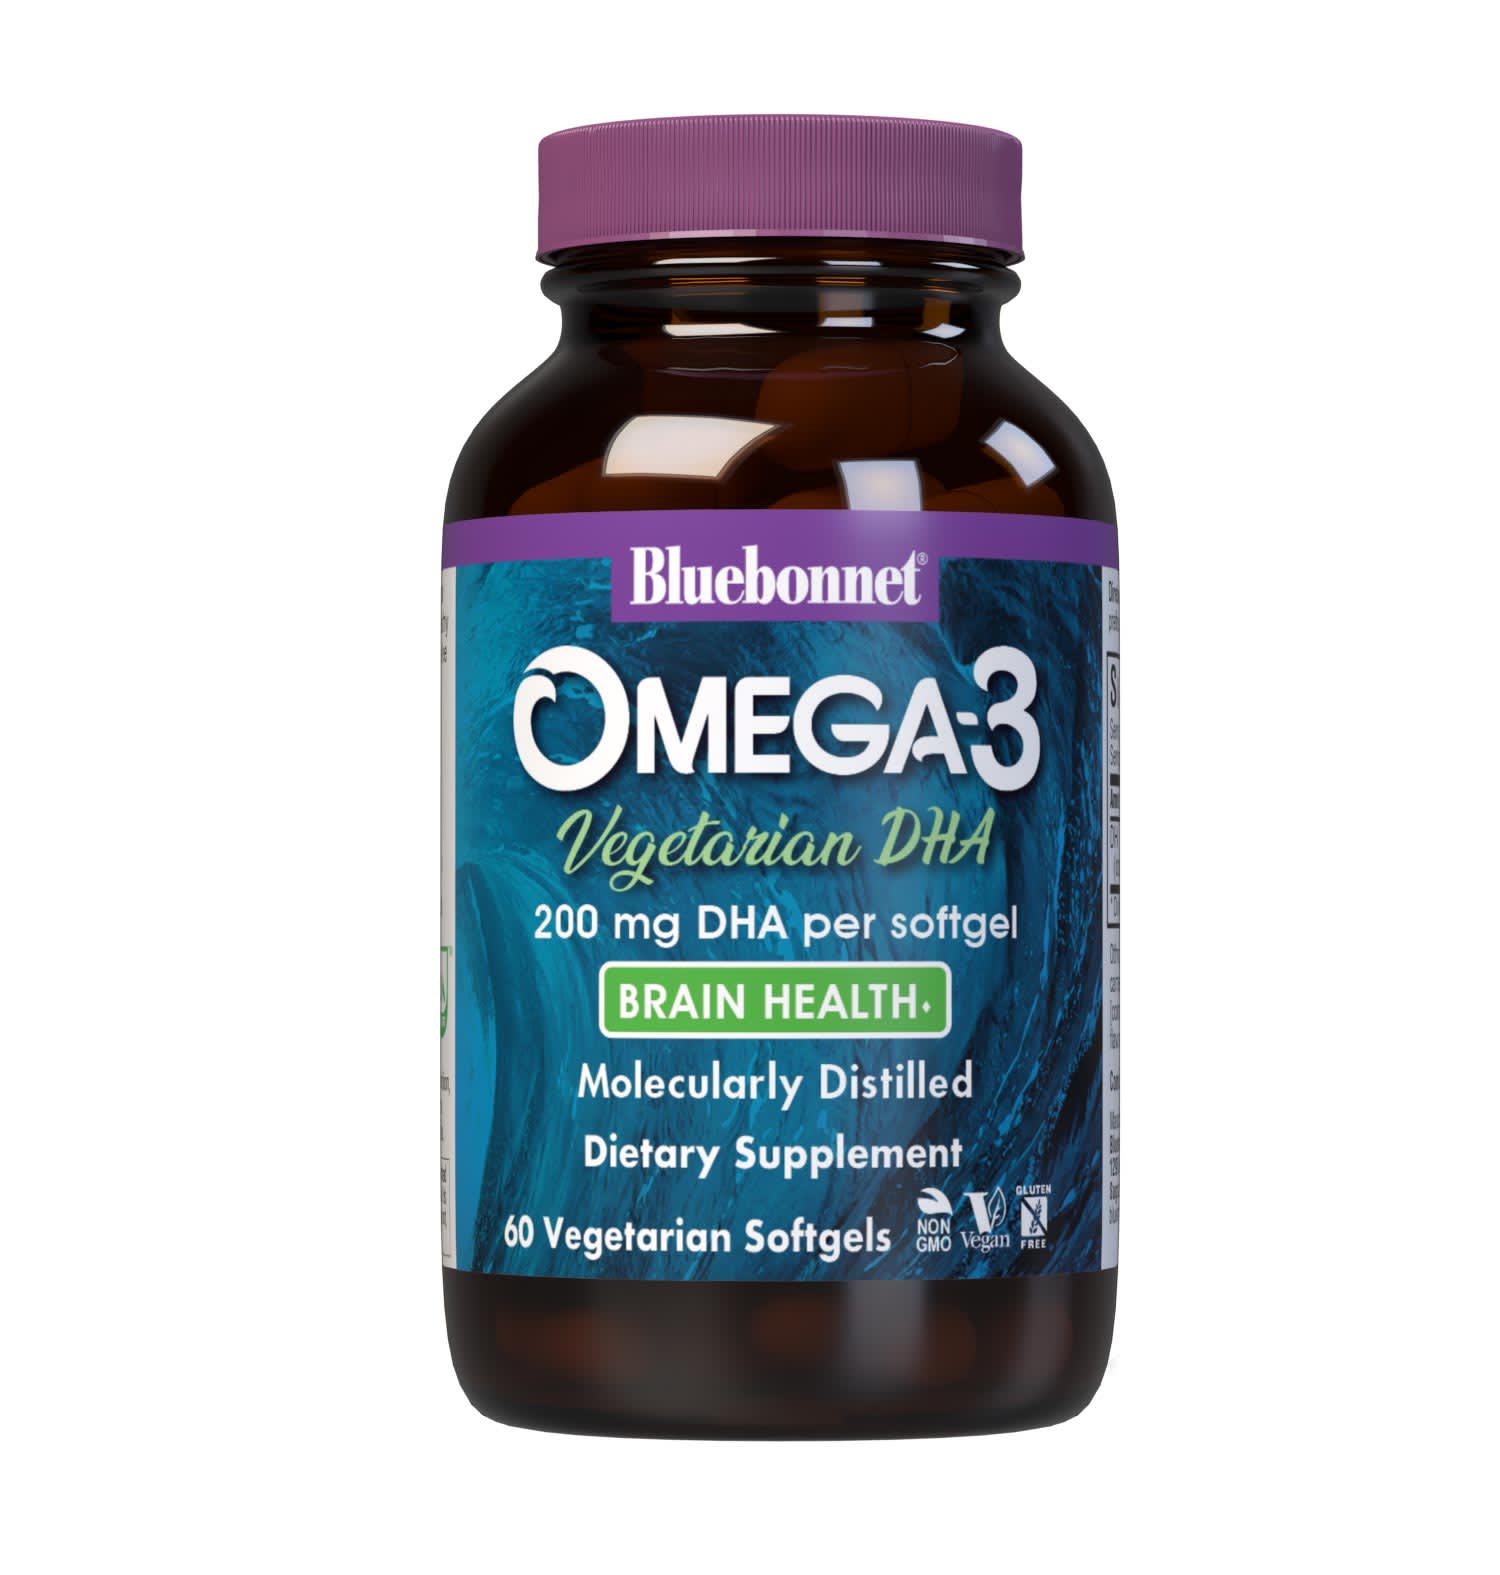 Bluebonnet’s Omega-3 Vegetarian DHA 200 mg 60 Vegetarian Softgels are formulated with life’sDHA, to help support a healthy mood as well as brain and eye function by utilzing a catch-free docosahexaenoic acid (DHA) from marine algae. #size_60 count